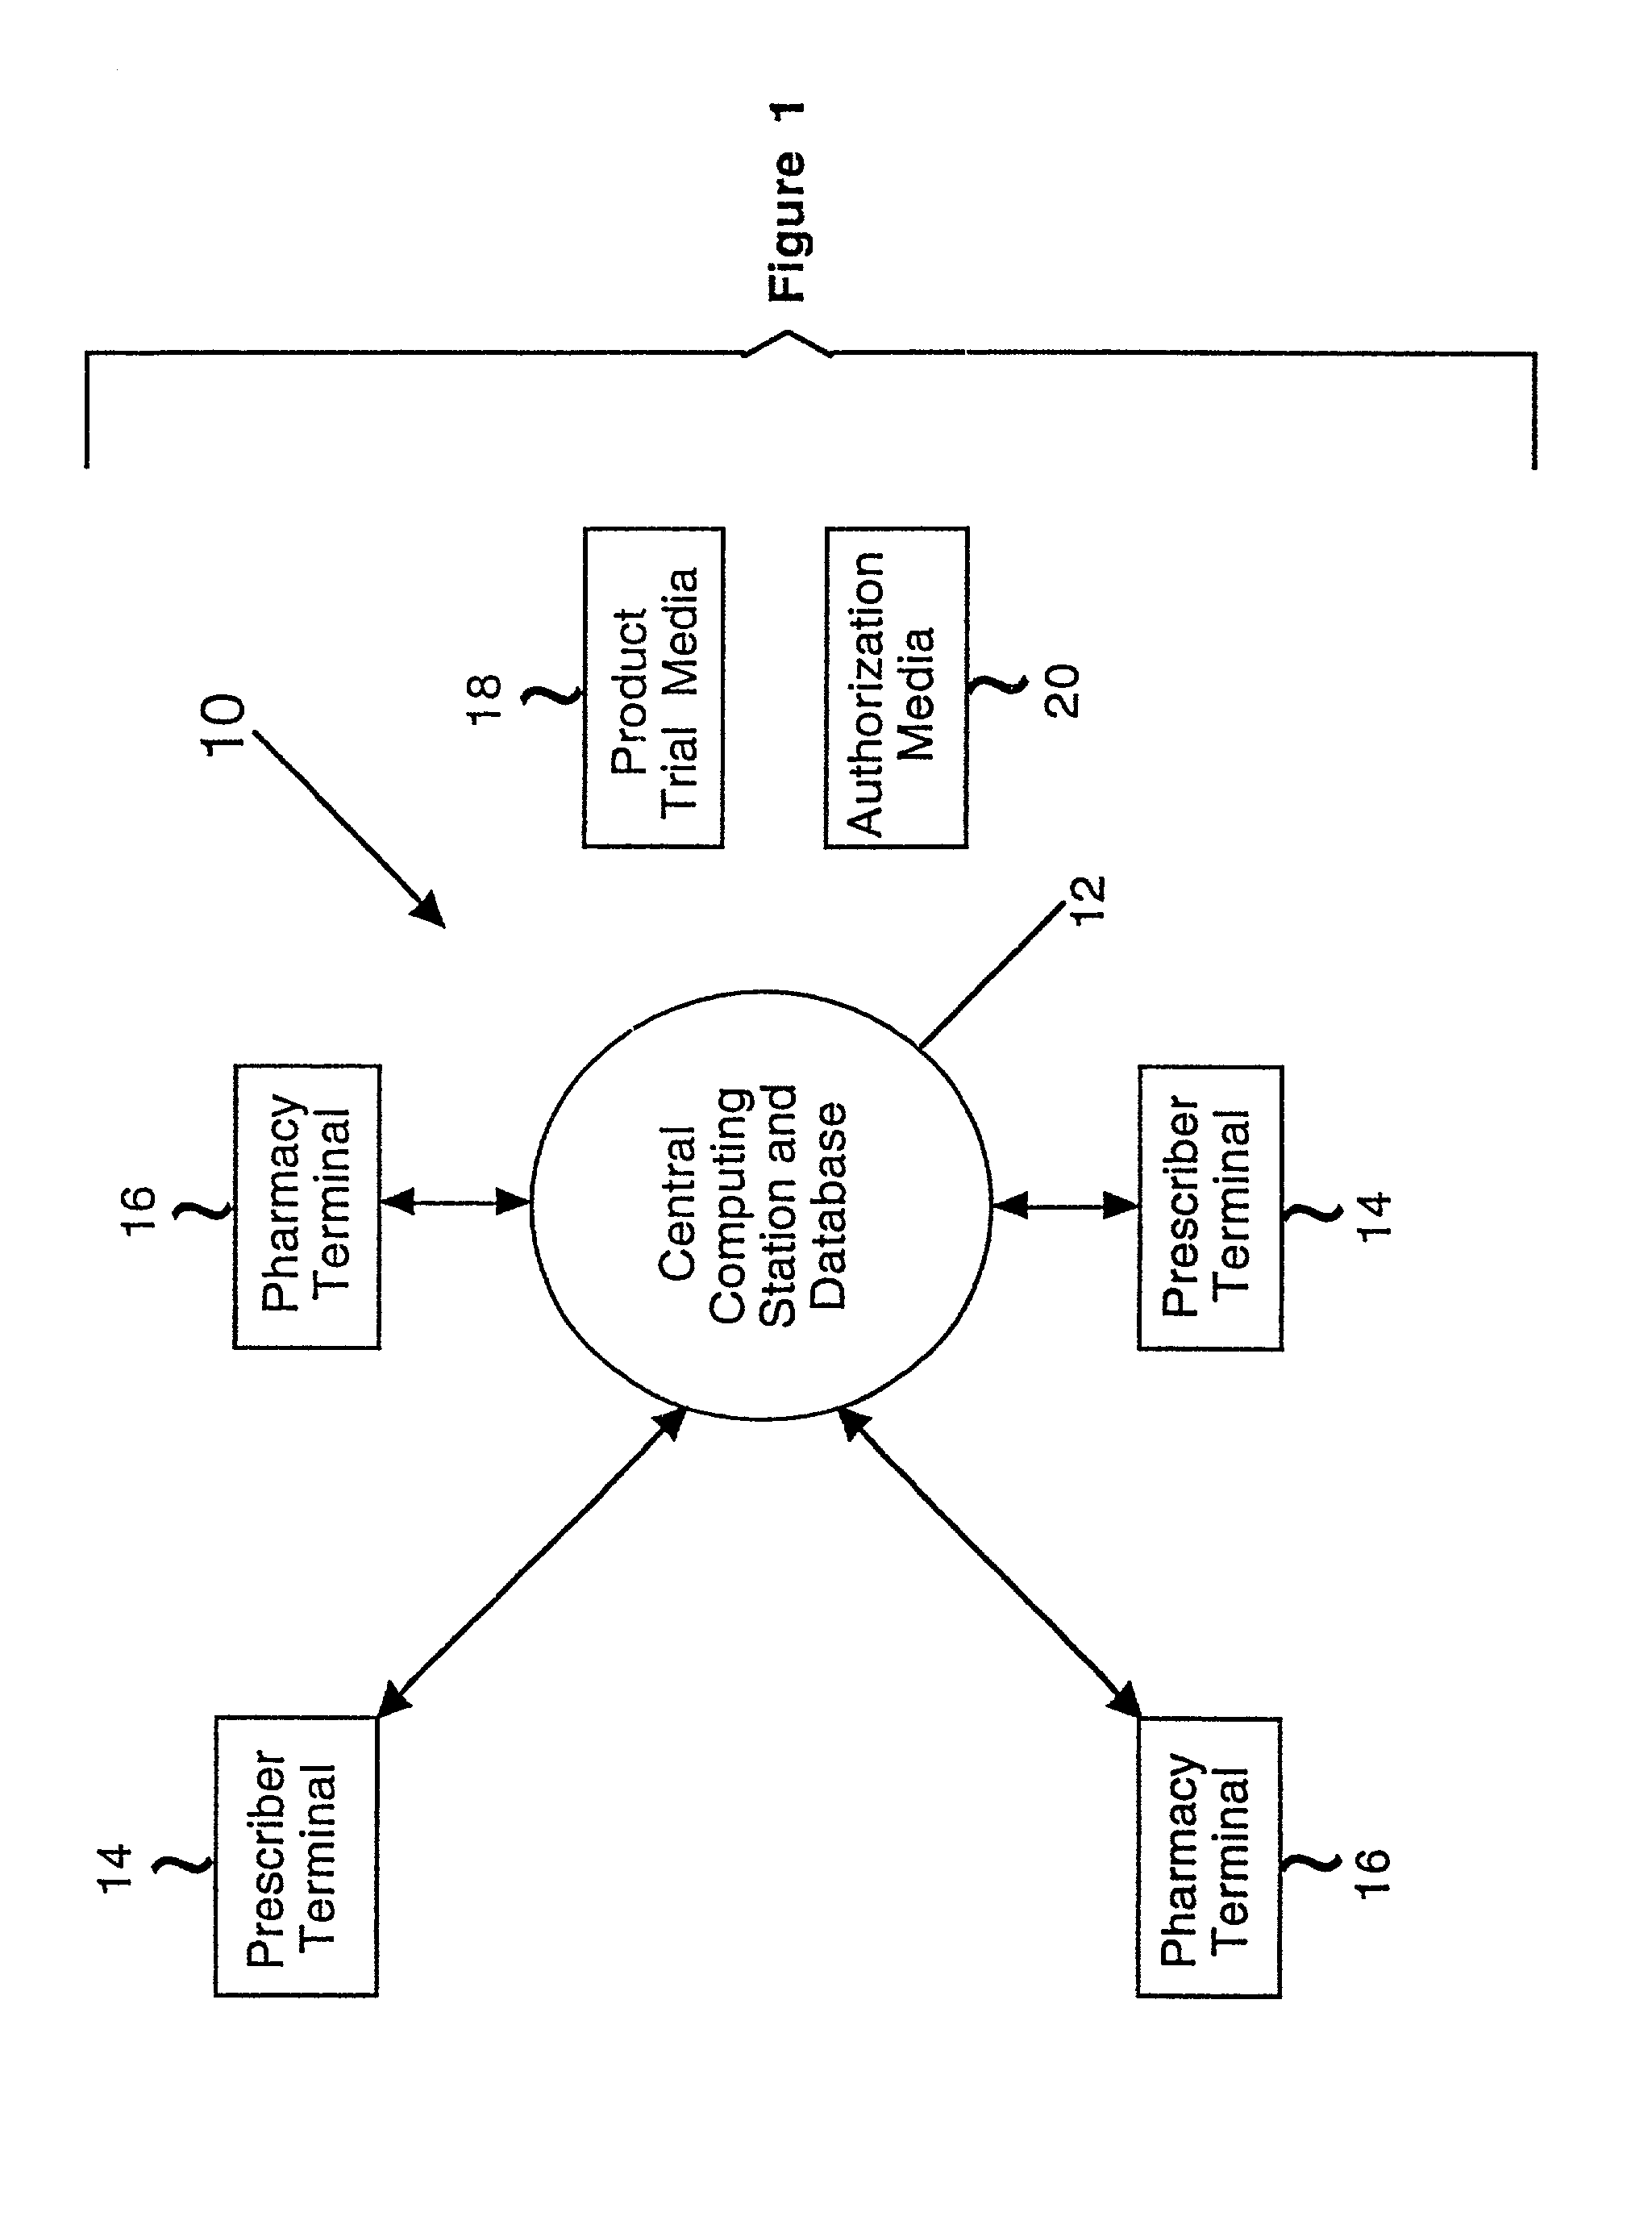 Method of delivering goods and services via media